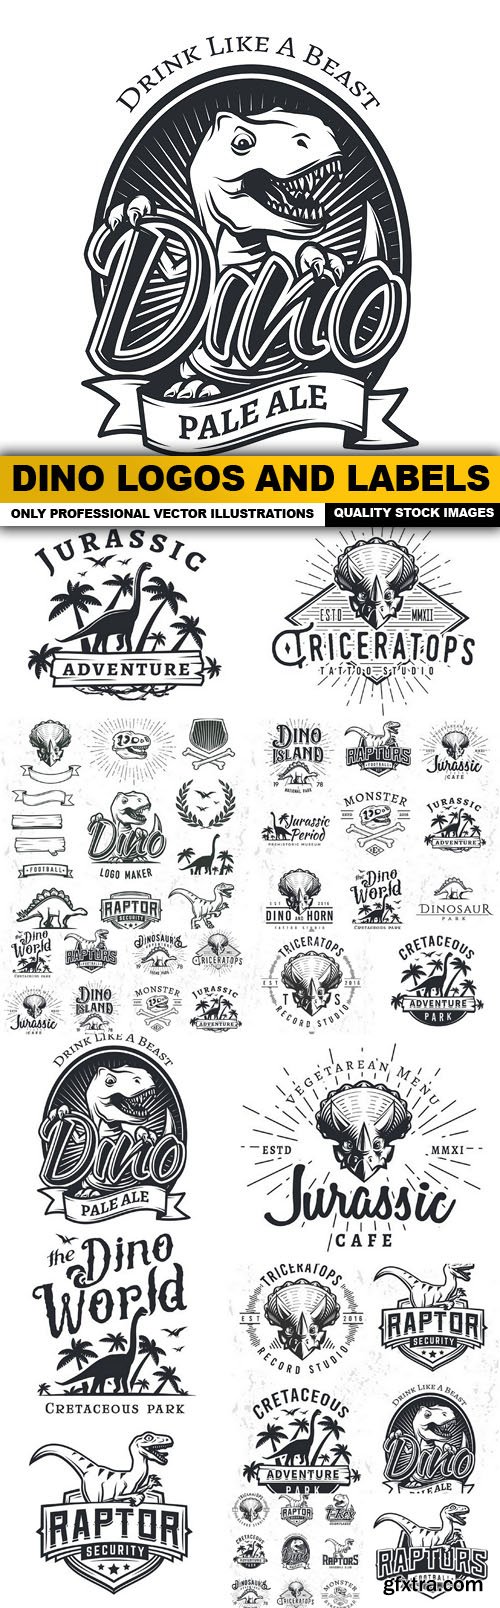 Dino Logos And Labels - 15 Vector